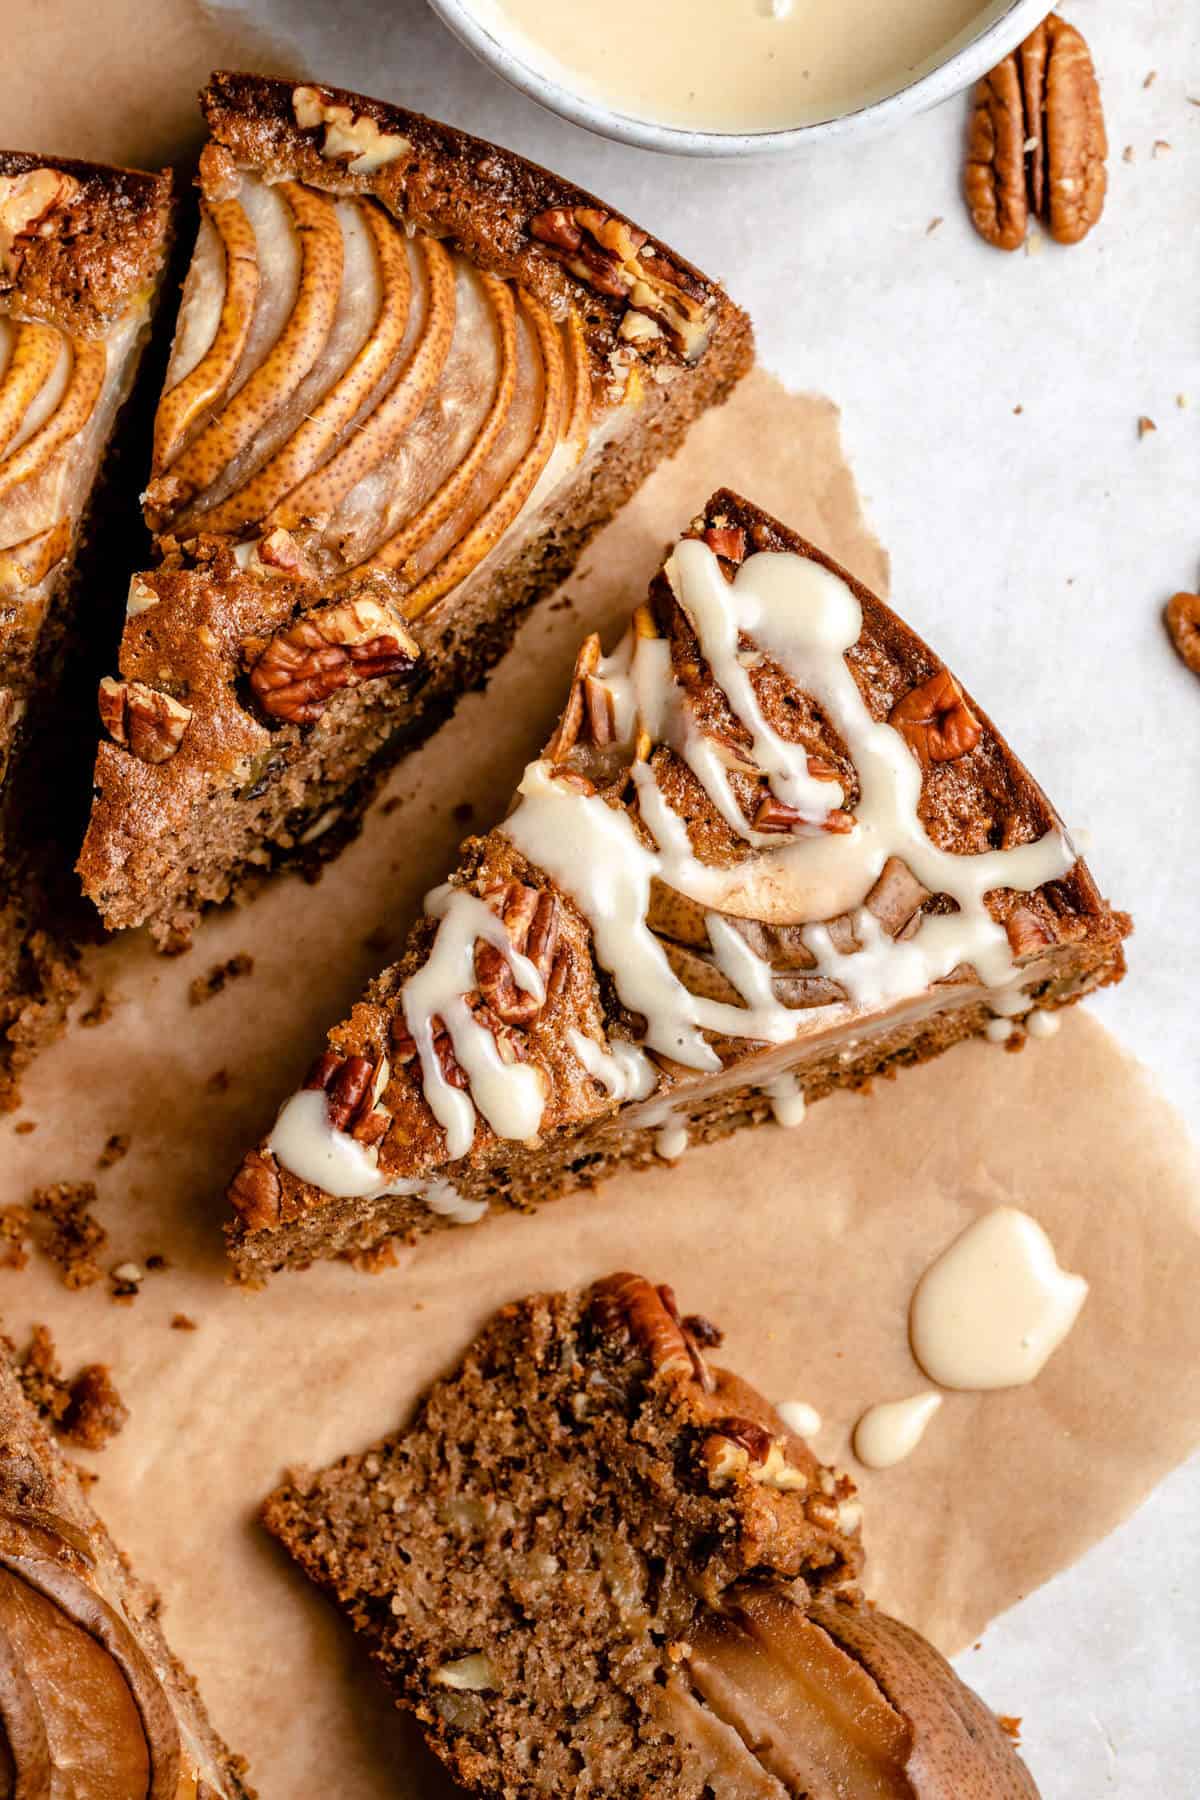 a close up image of a slice of cake drizzled with glaze, with more slices of cake and pecans around it